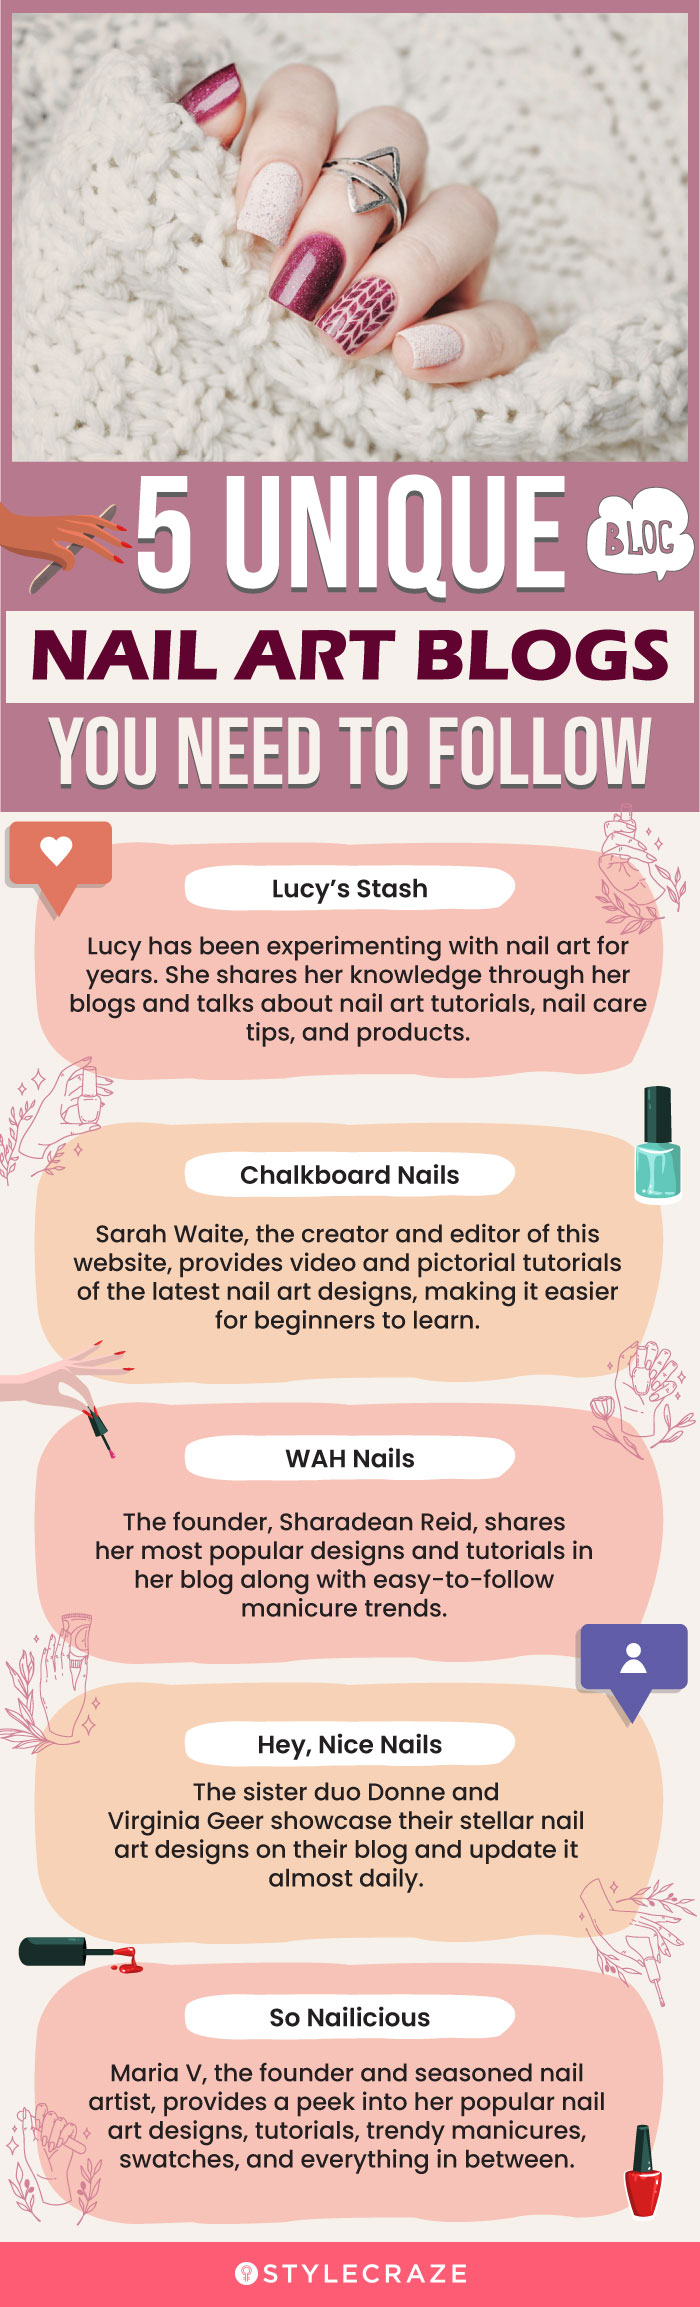 5 unique nail art blogs you need to follow (infographic)